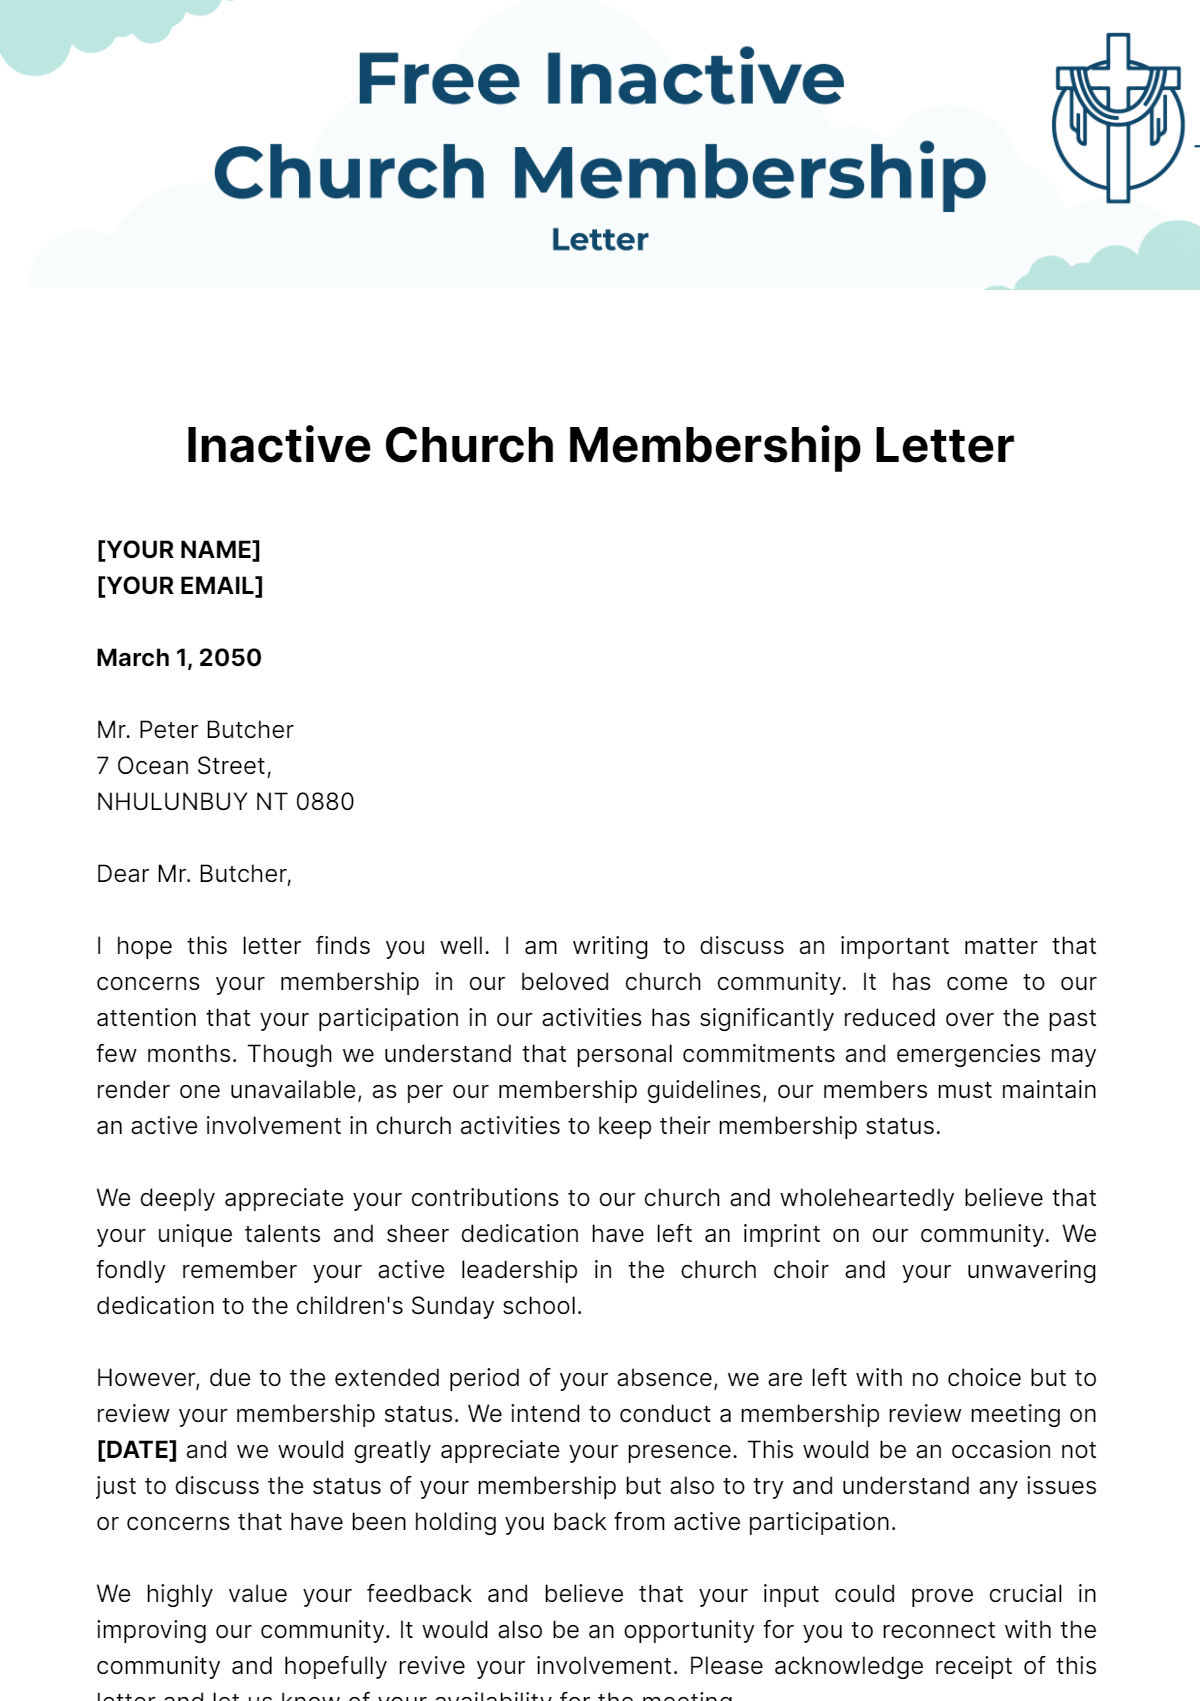 Free Inactive Church Membership Letter Template